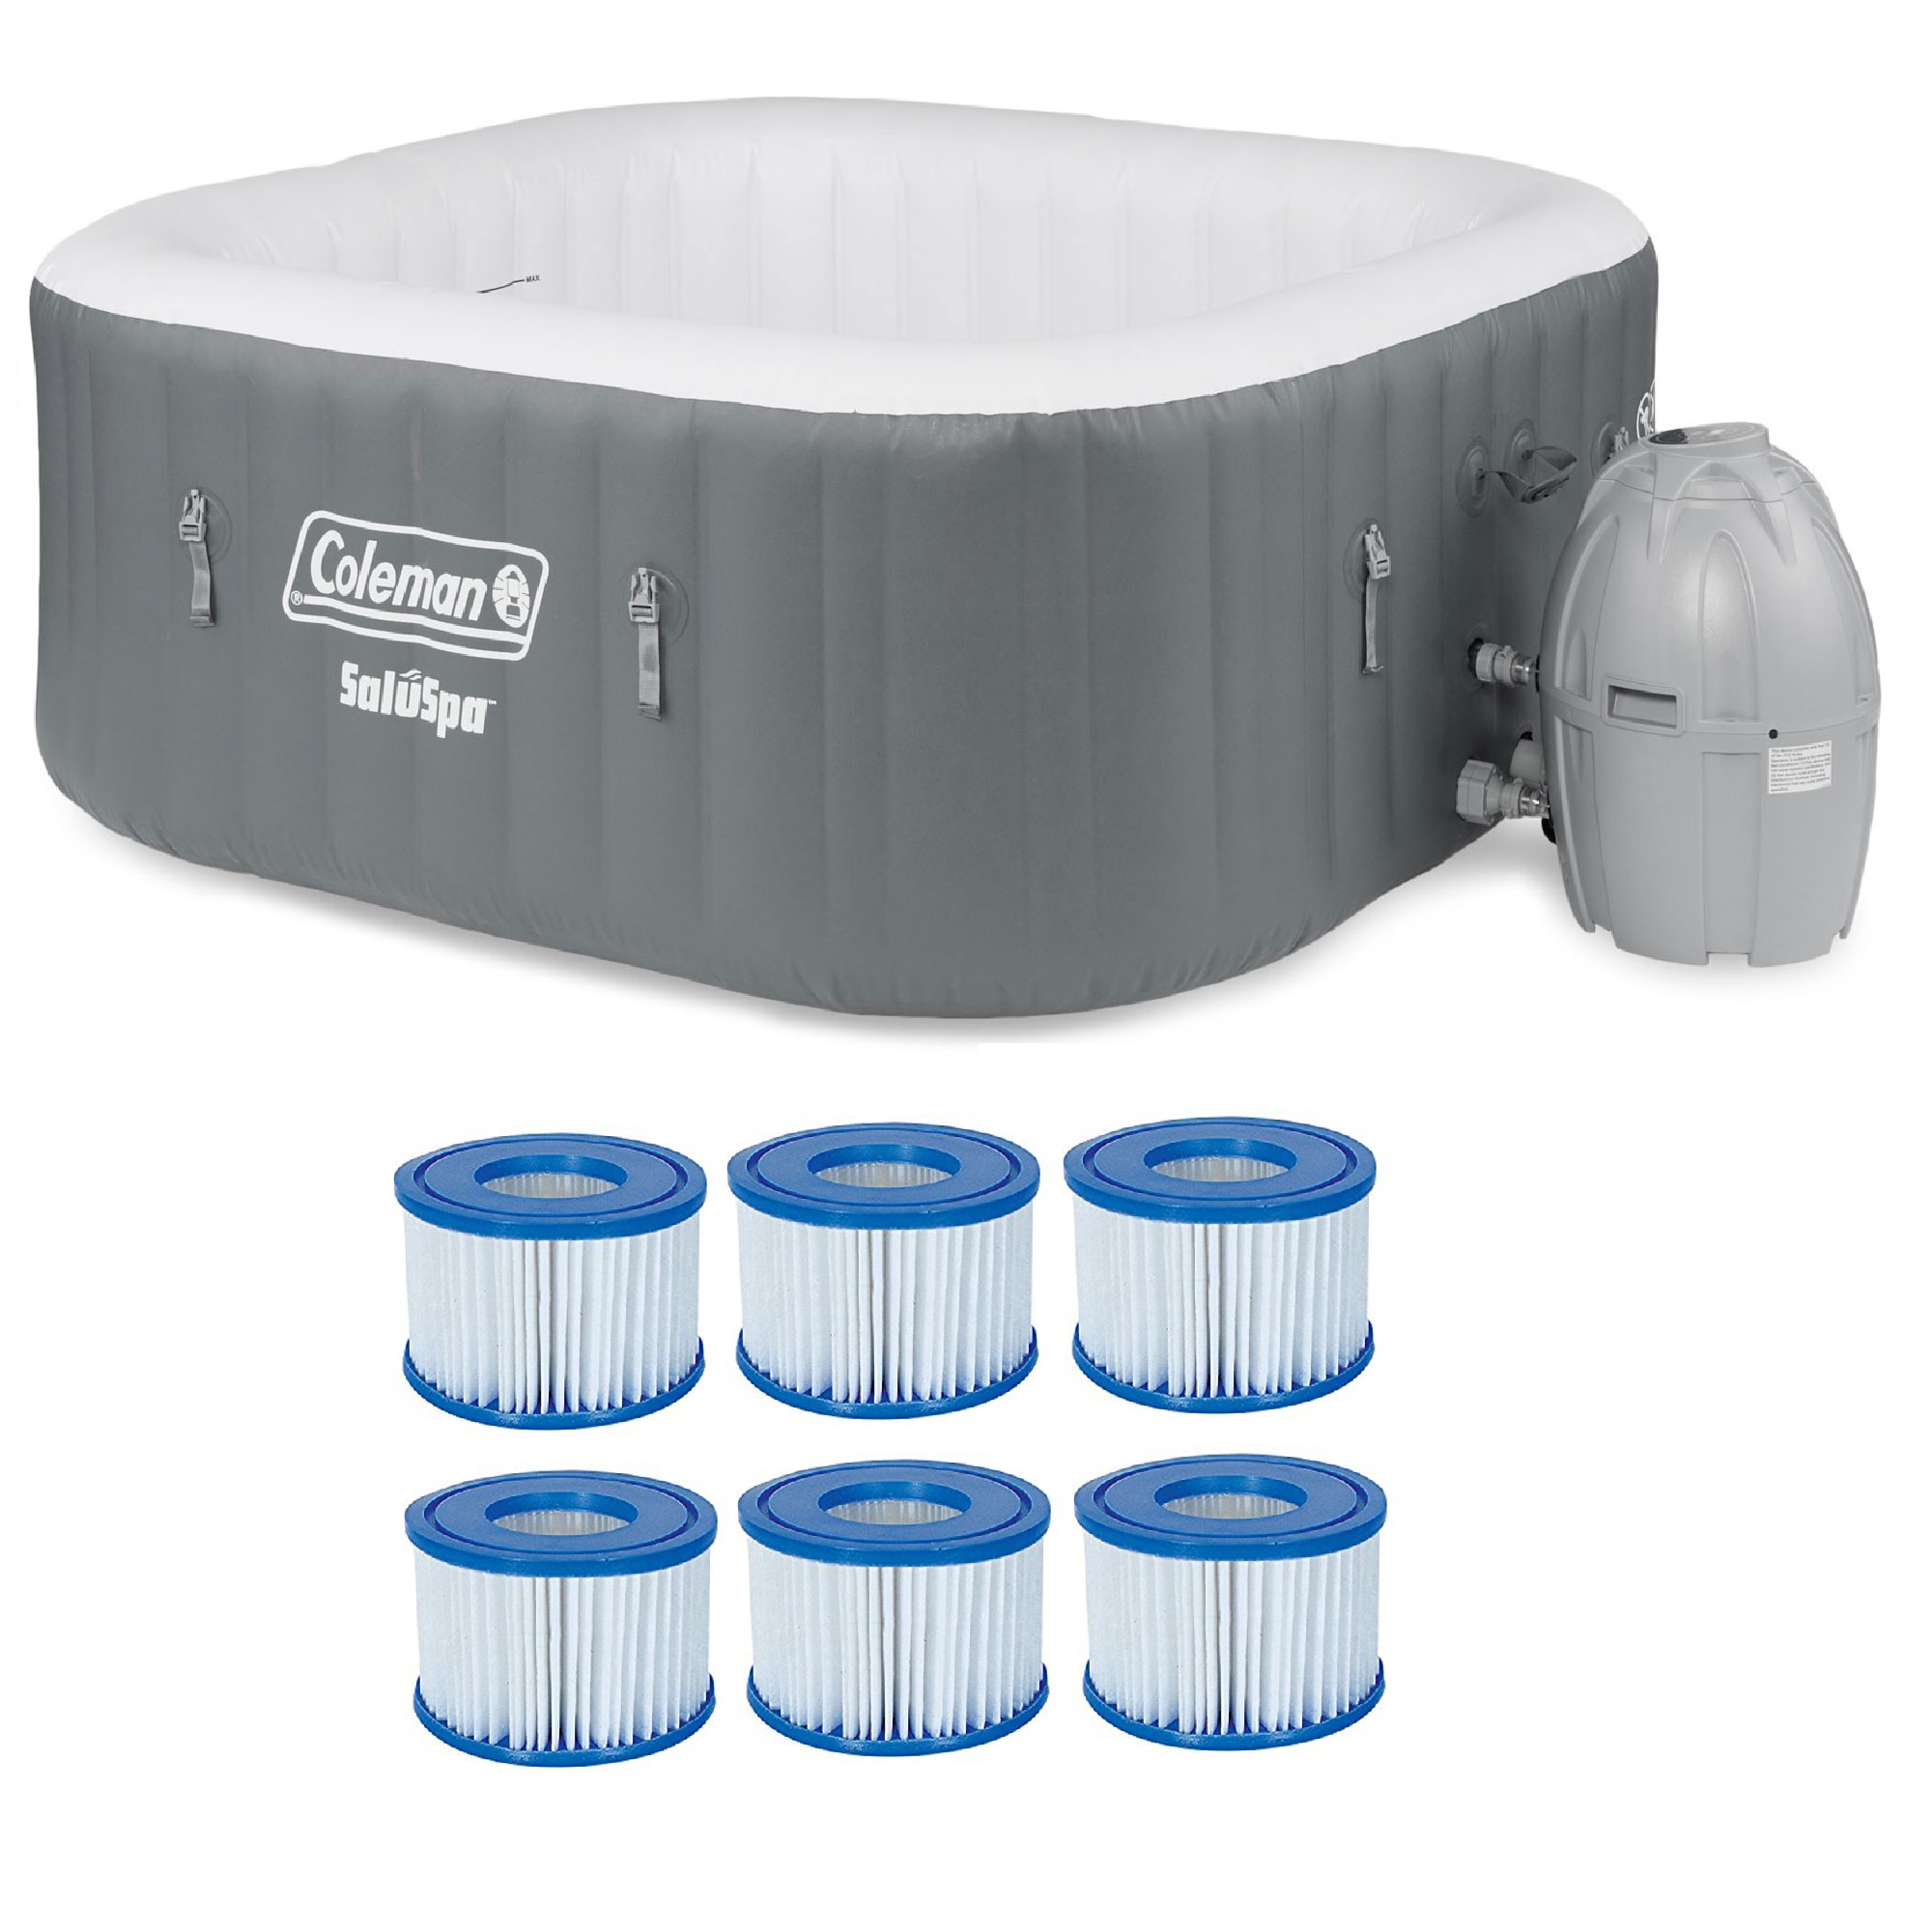 Coleman Saluspa 4 Person Square Portable Inflatable Hot Tub And 6 Pack Of Filters Ebay